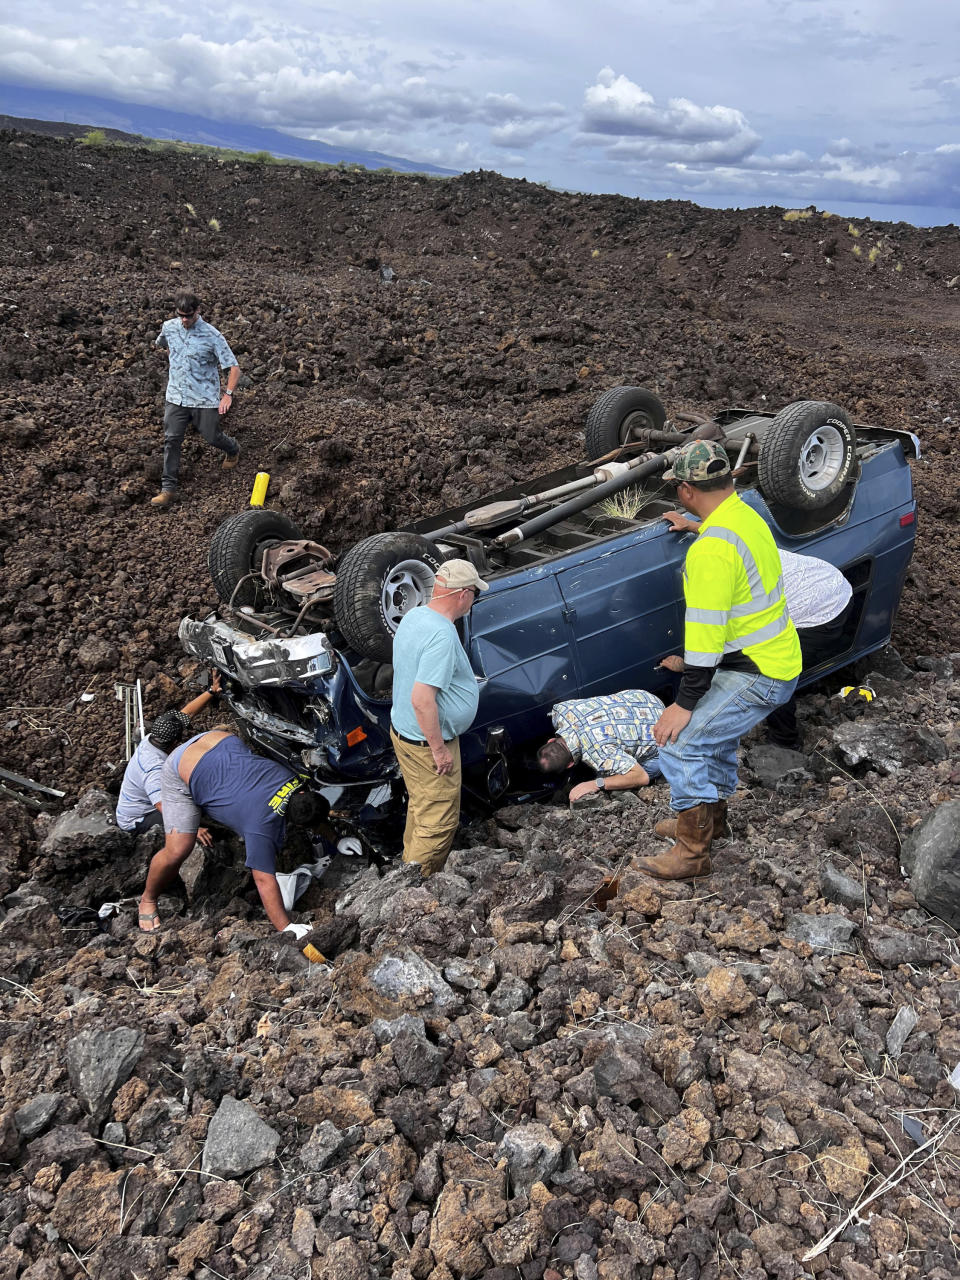 Hawaii Gov. Josh Green, middle, kneels down to look under an upside down vehicle's driver at the scene of an accident in Waikoloa, Hawaii on Thursday, May 18, 2023. Gov. Green, who has worked as an emergency room doctor in rural parts of the Big Island stopped to help out when his security detail spotted a vehicle upside down in a lava field Thursday while en route to a Big Island event. The man suffered a few cuts and bruises and seemed to be OK, Green said. (Reece Kainoa Kilbey/Office of the Governor, State of Hawai'i via AP)